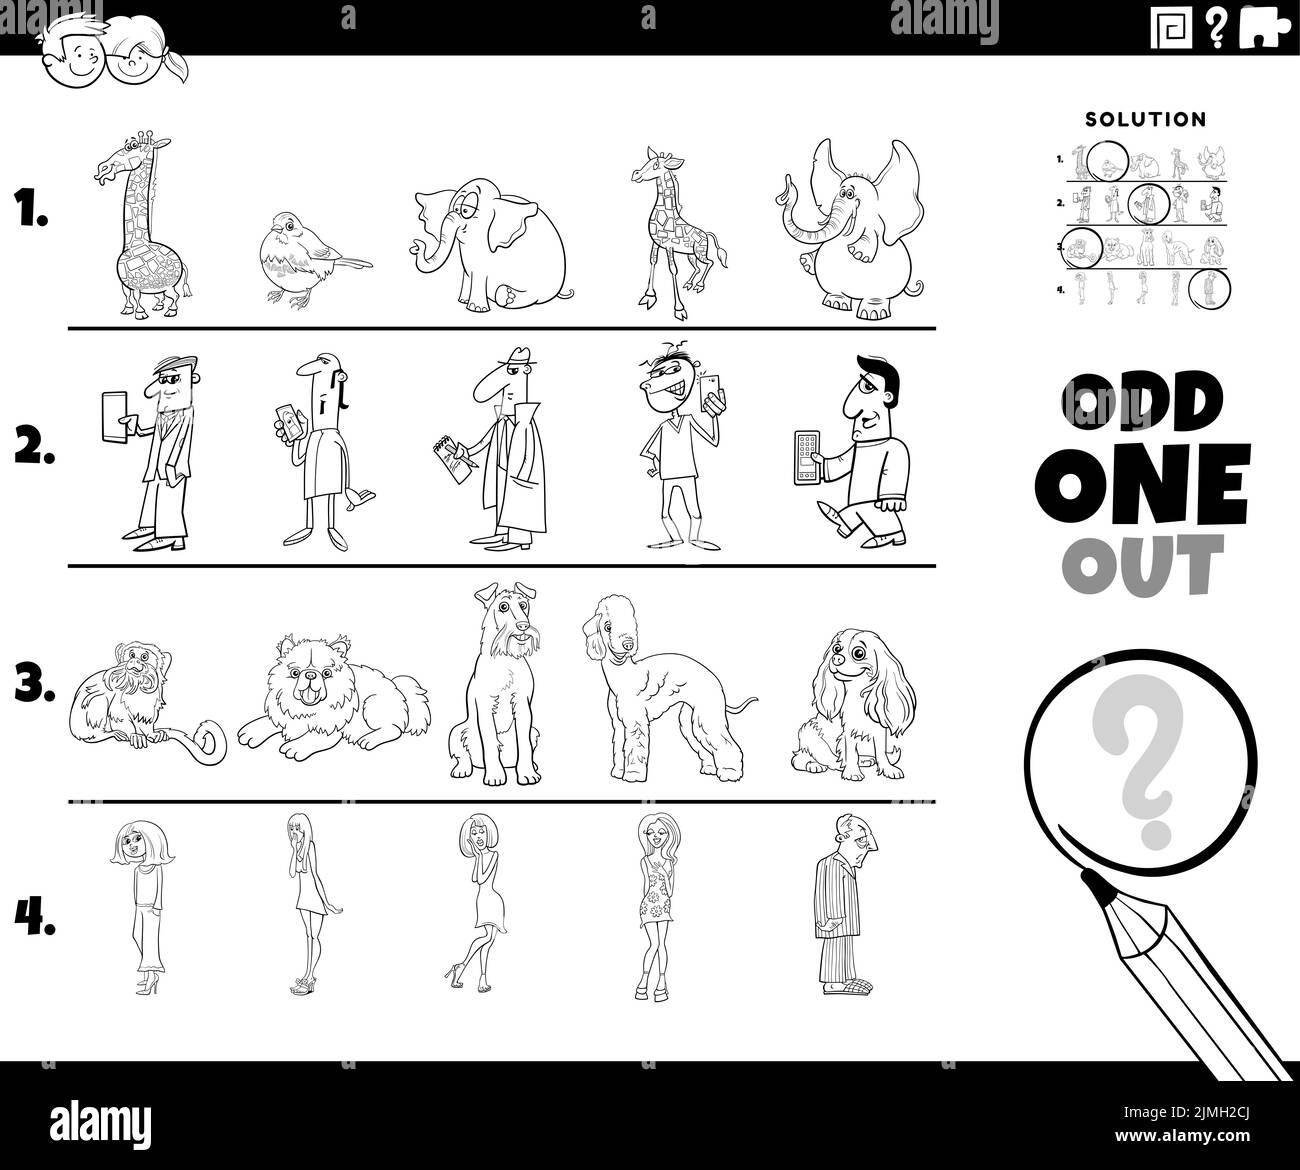 Odd one out task with cartoon characters coloring book page Stock Photo